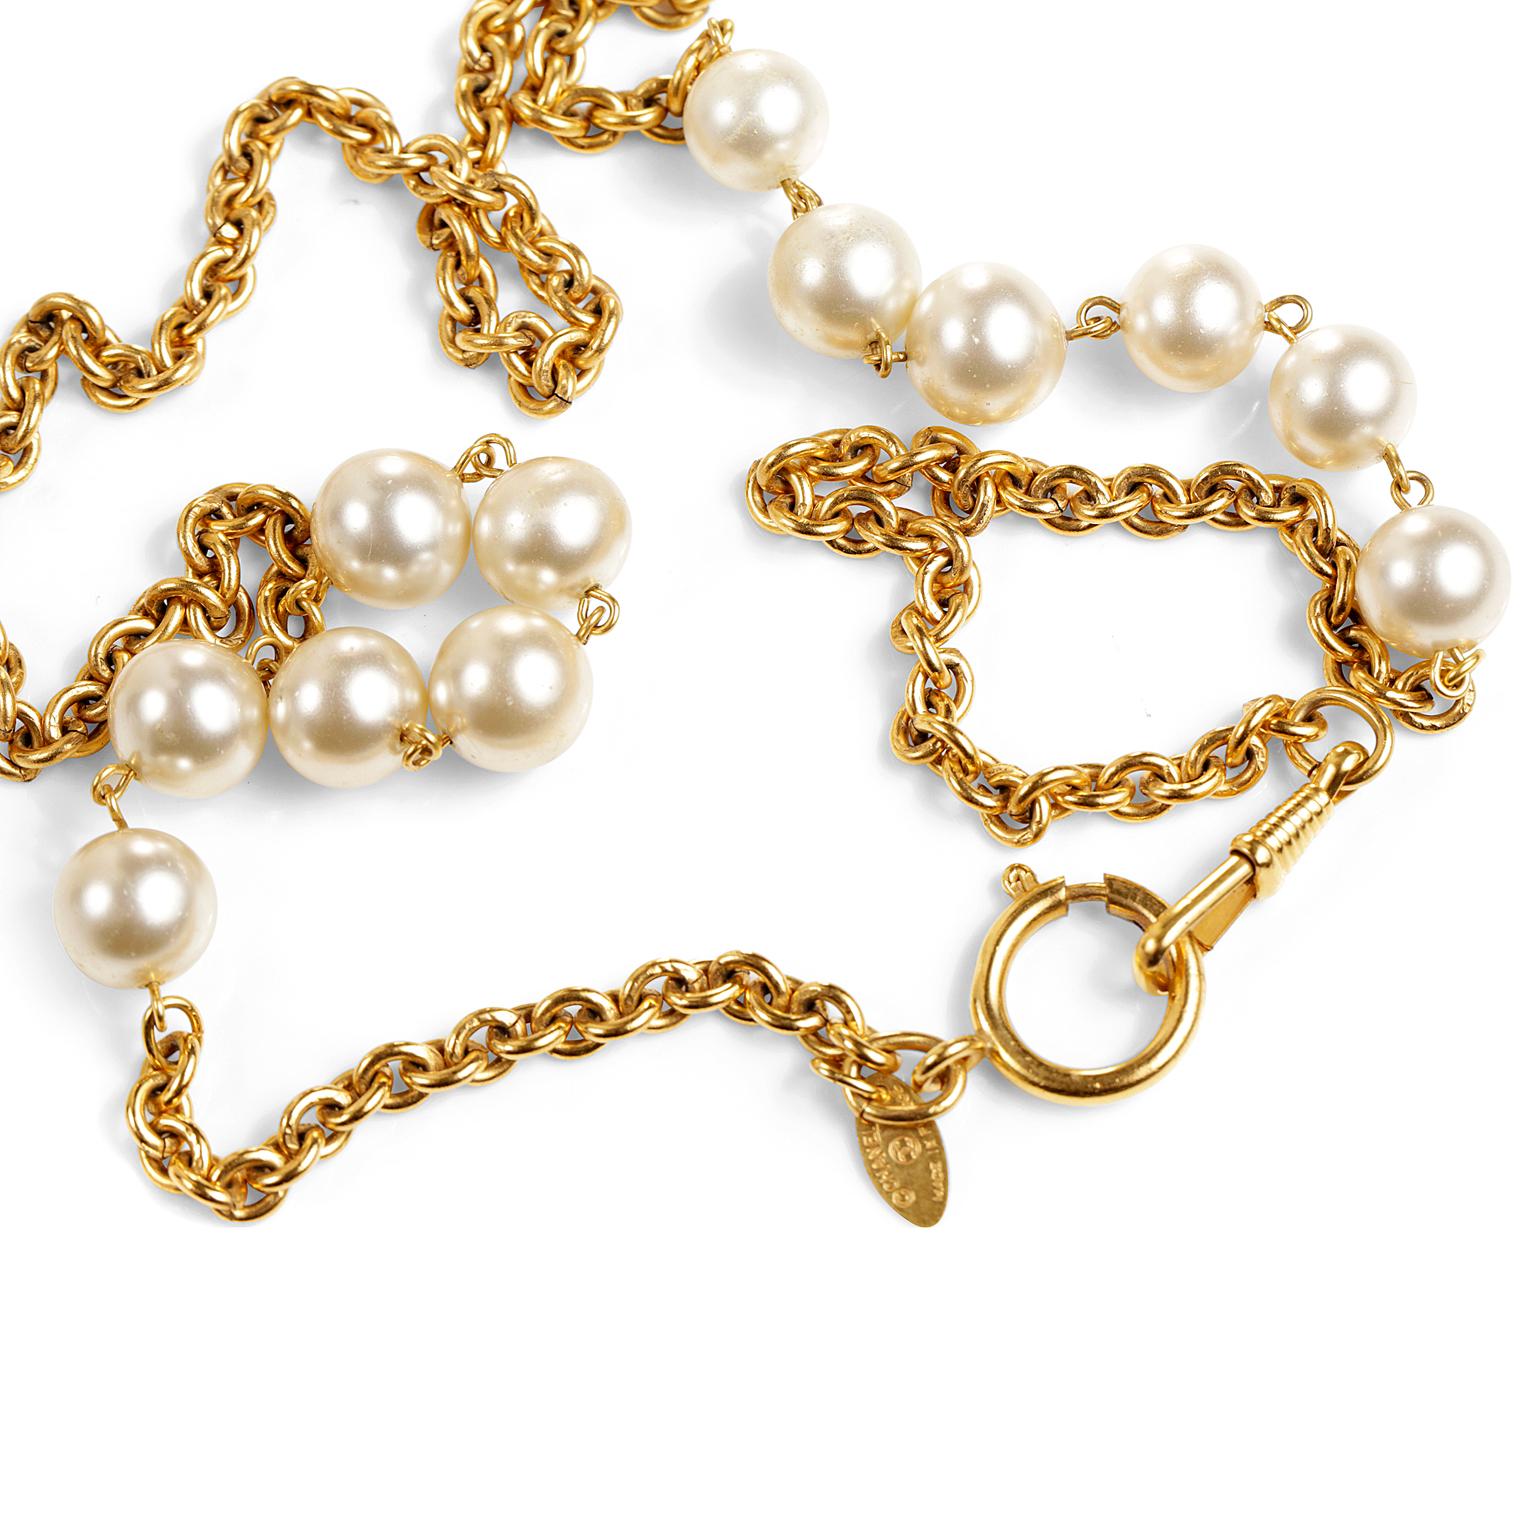 This authentic Chanel Gold and Pearl Station Necklace is in excellent condition.  Produced in the 1980’s, this piece holds its value and remains ever stylish.
Long gold link necklace has elegant faux pearl stations on either side.  Five pearls per